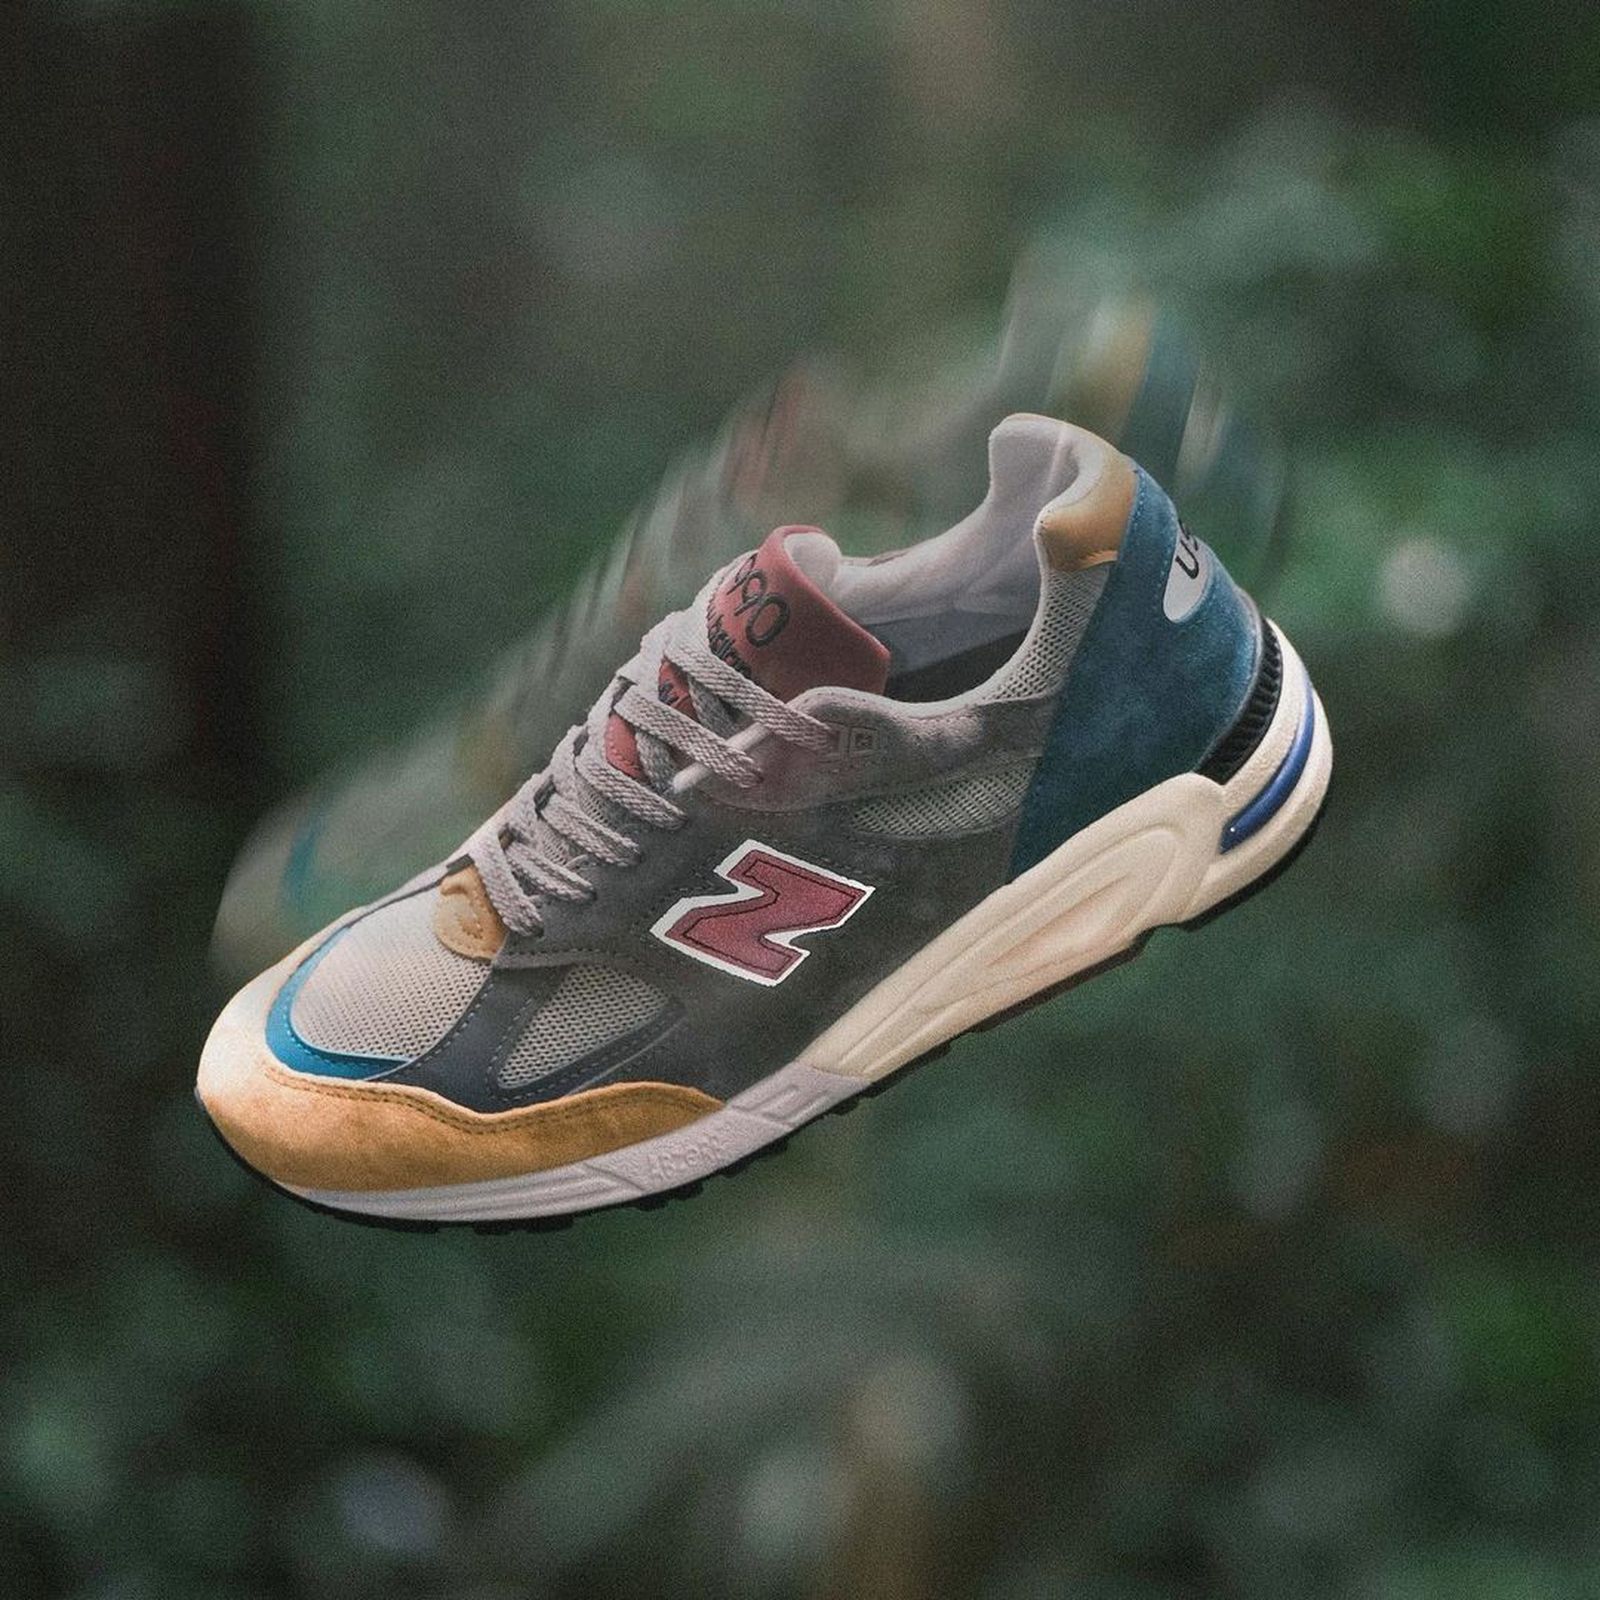 The New Balance 990v2 Is Another Masterful Japan-Exclusive